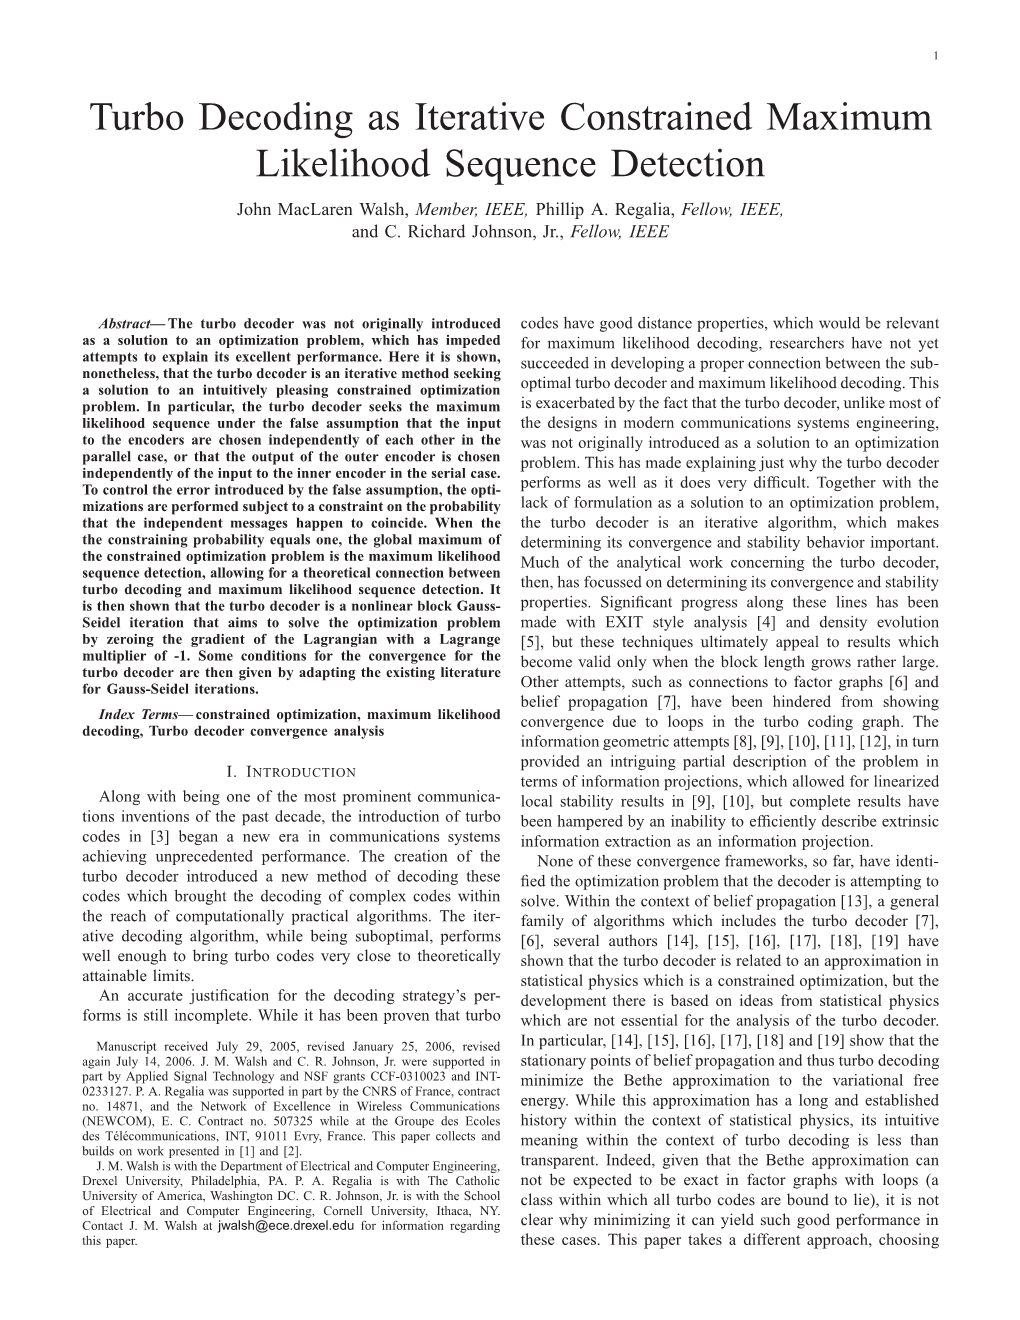 Turbo Decoding As Iterative Constrained Maximum Likelihood Sequence Detection John Maclaren Walsh, Member, IEEE, Phillip A